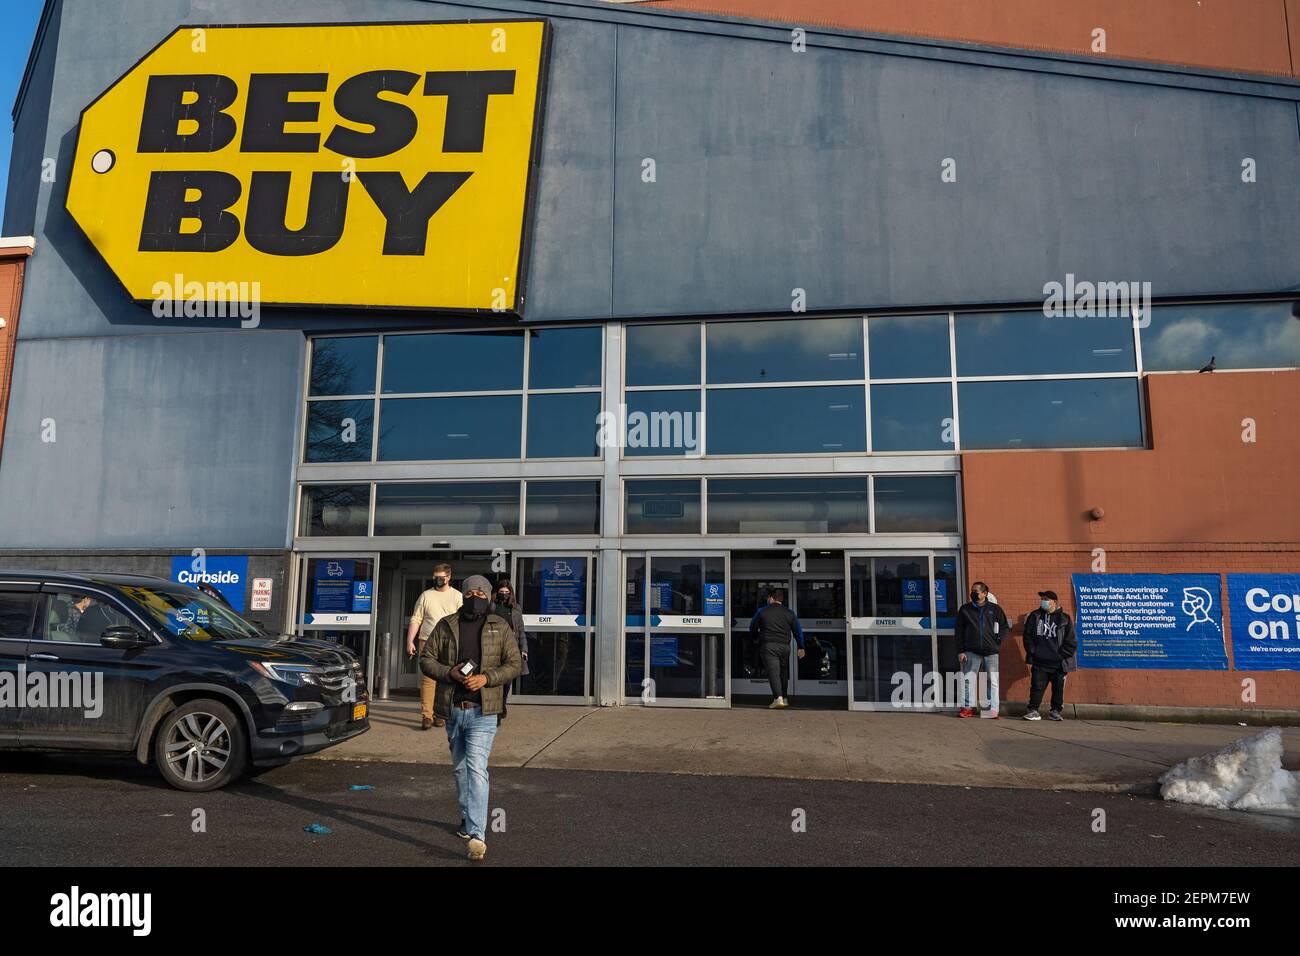 NEW YORK, NY – FEBRUARY 27:  Customers walk in and out of a Best Buy store in Queens on February 27, 2021 in New York City.  Best Buy Co. (BBY) lays off 5,000 workers, the majority of whom worked full-time and adding approximately 2,000 new part-time positions as it shifts focus to online sales.  The pandemic has accelerated Best Buy's transition to selling online said Chief Executive Corie Barry on a call with analysts on Thursday. Credit: Ron Adar/Alamy Live News Stock Photo